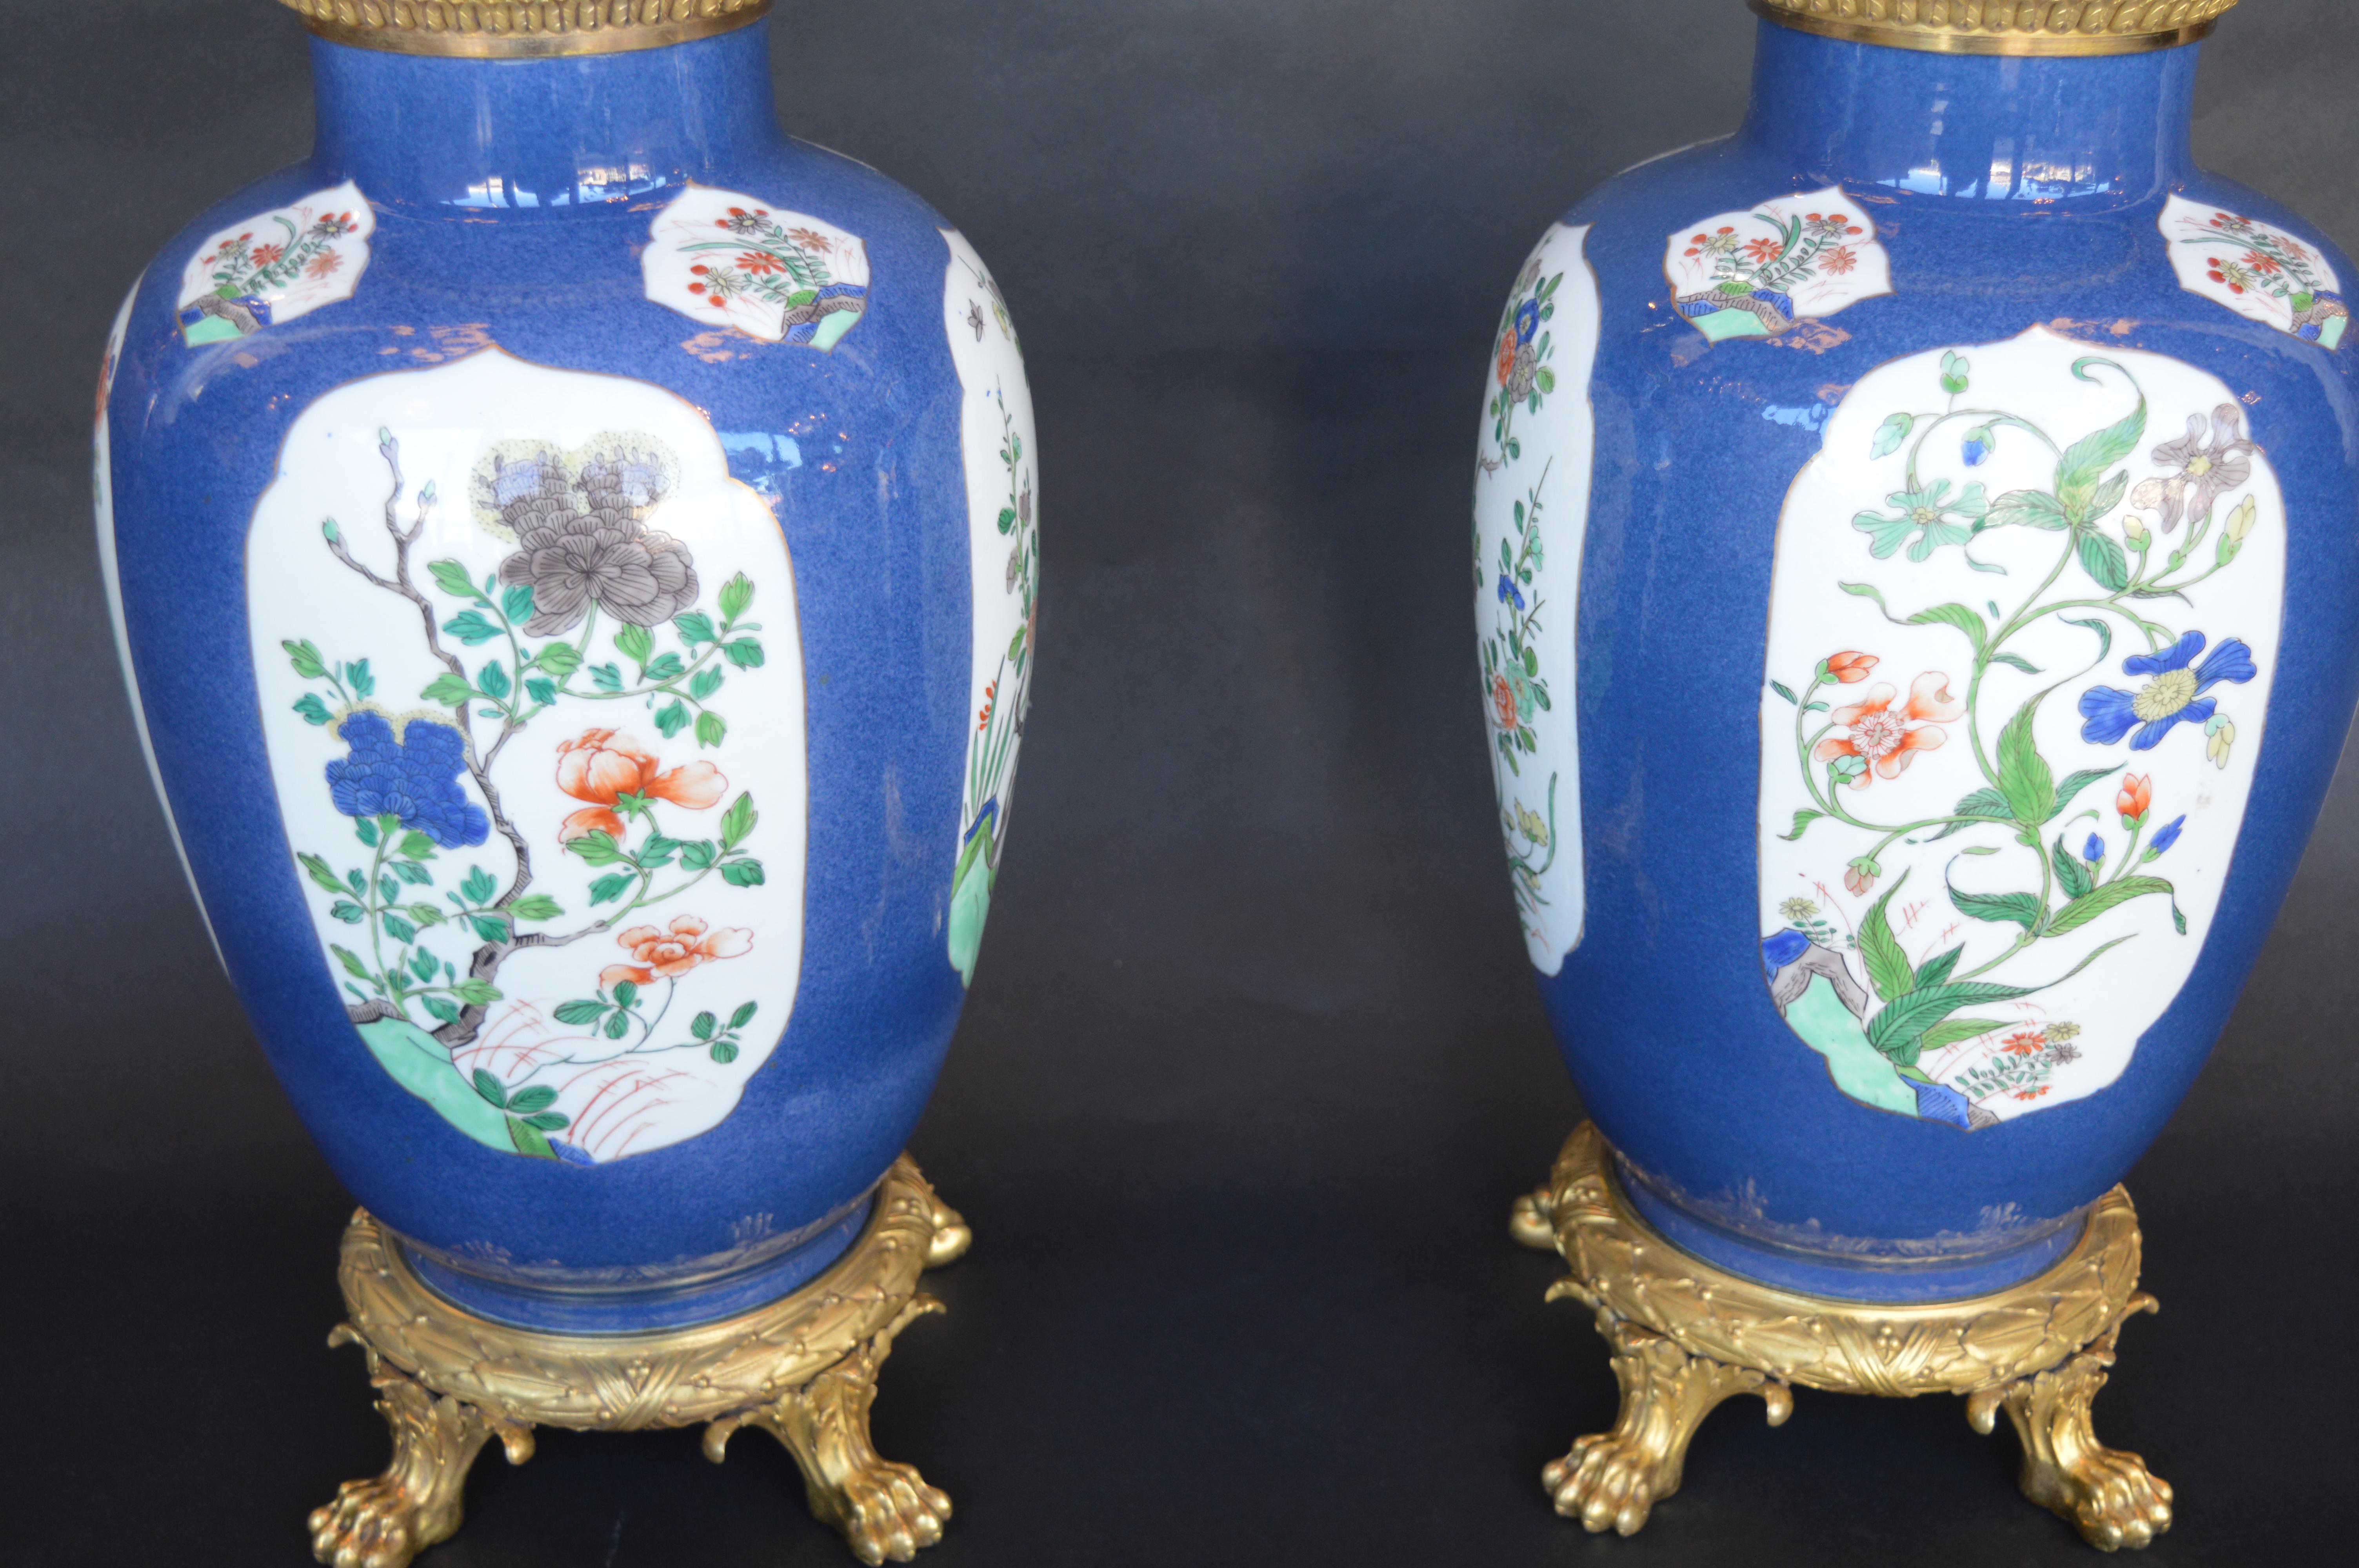 Pair of 19th Century Ormolu-Mounted Chinese Porcelain Vases For Sale 6